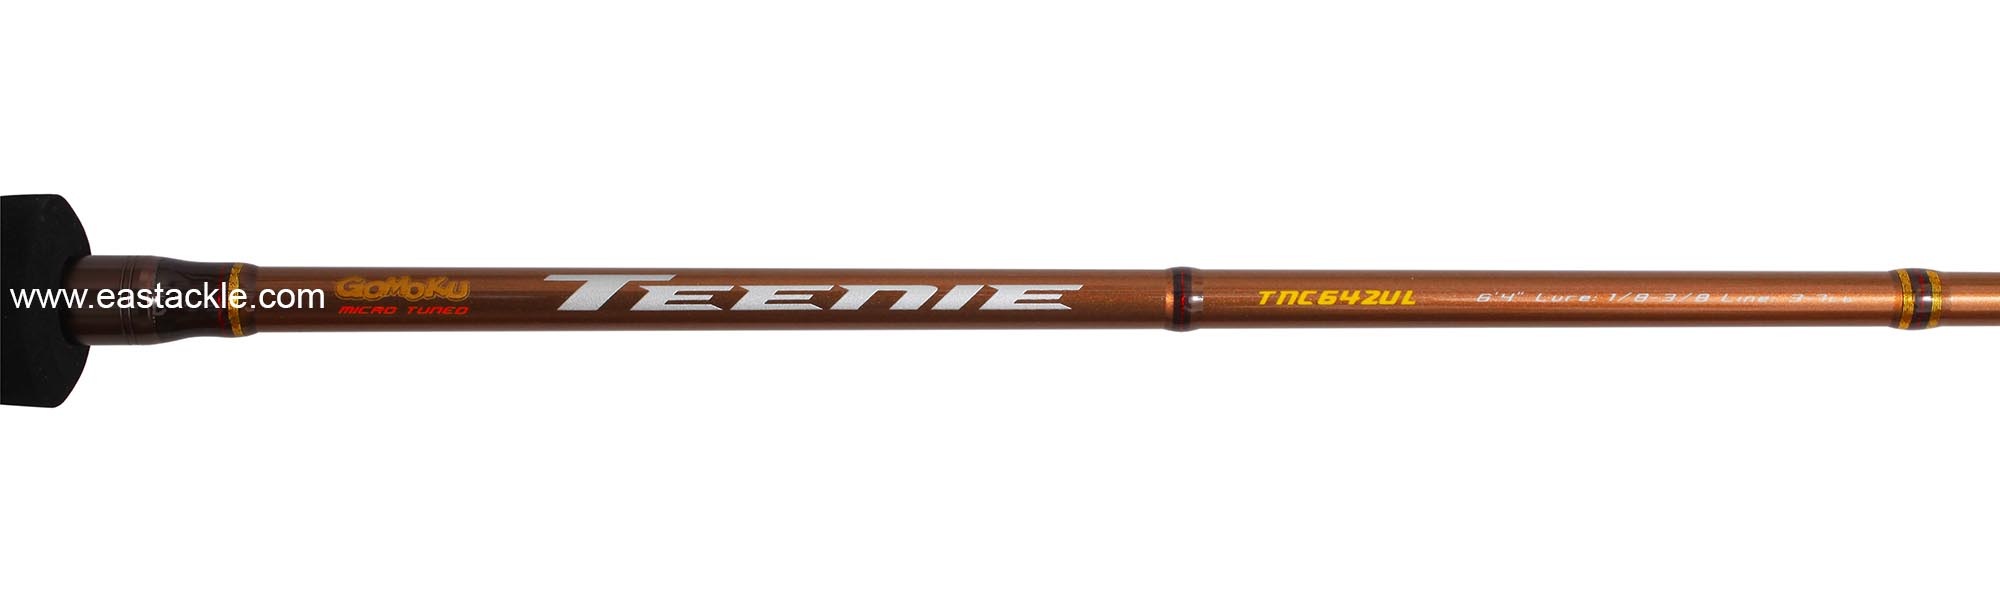 Storm - Teenie - TNC642UL - Bait Casting Rod - Logo and Blank Specifications (Top View) | Eastackle